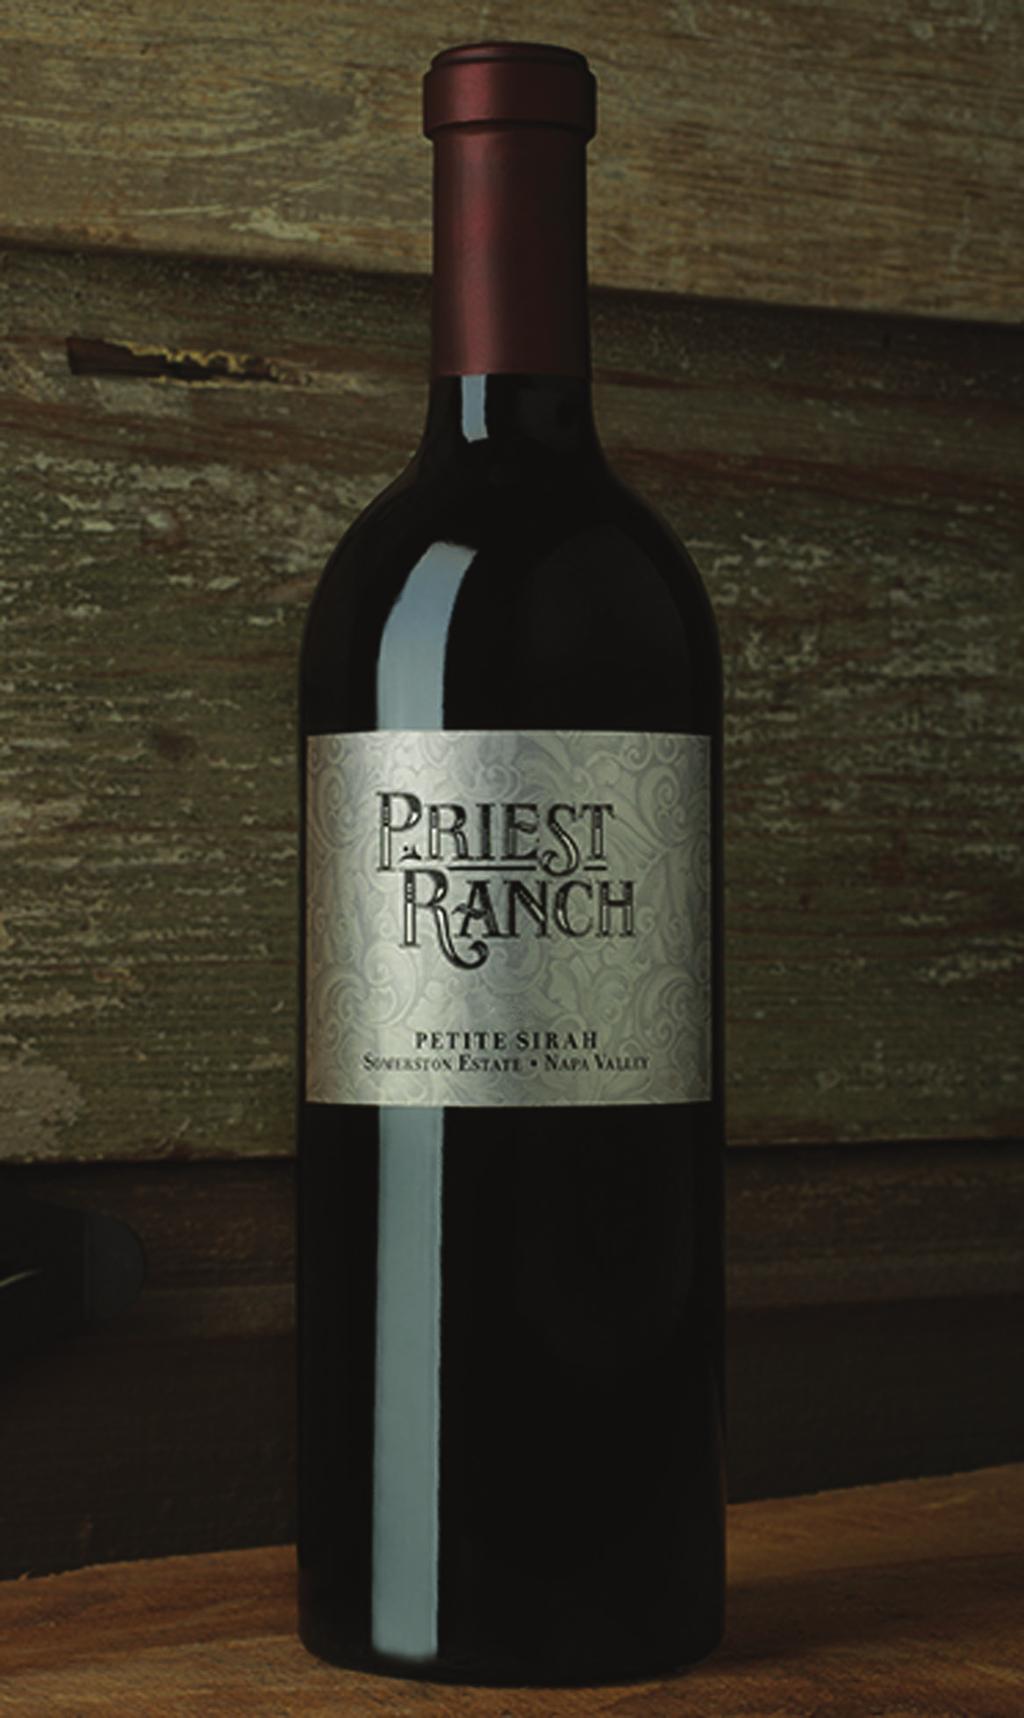 2012 PETITE SIRAH APPELLATION & VINEYARDS Priest Ranch wines are all estate grown and bottled from the historic 638 acre Priest Ranch portion of the Somerston Estate.